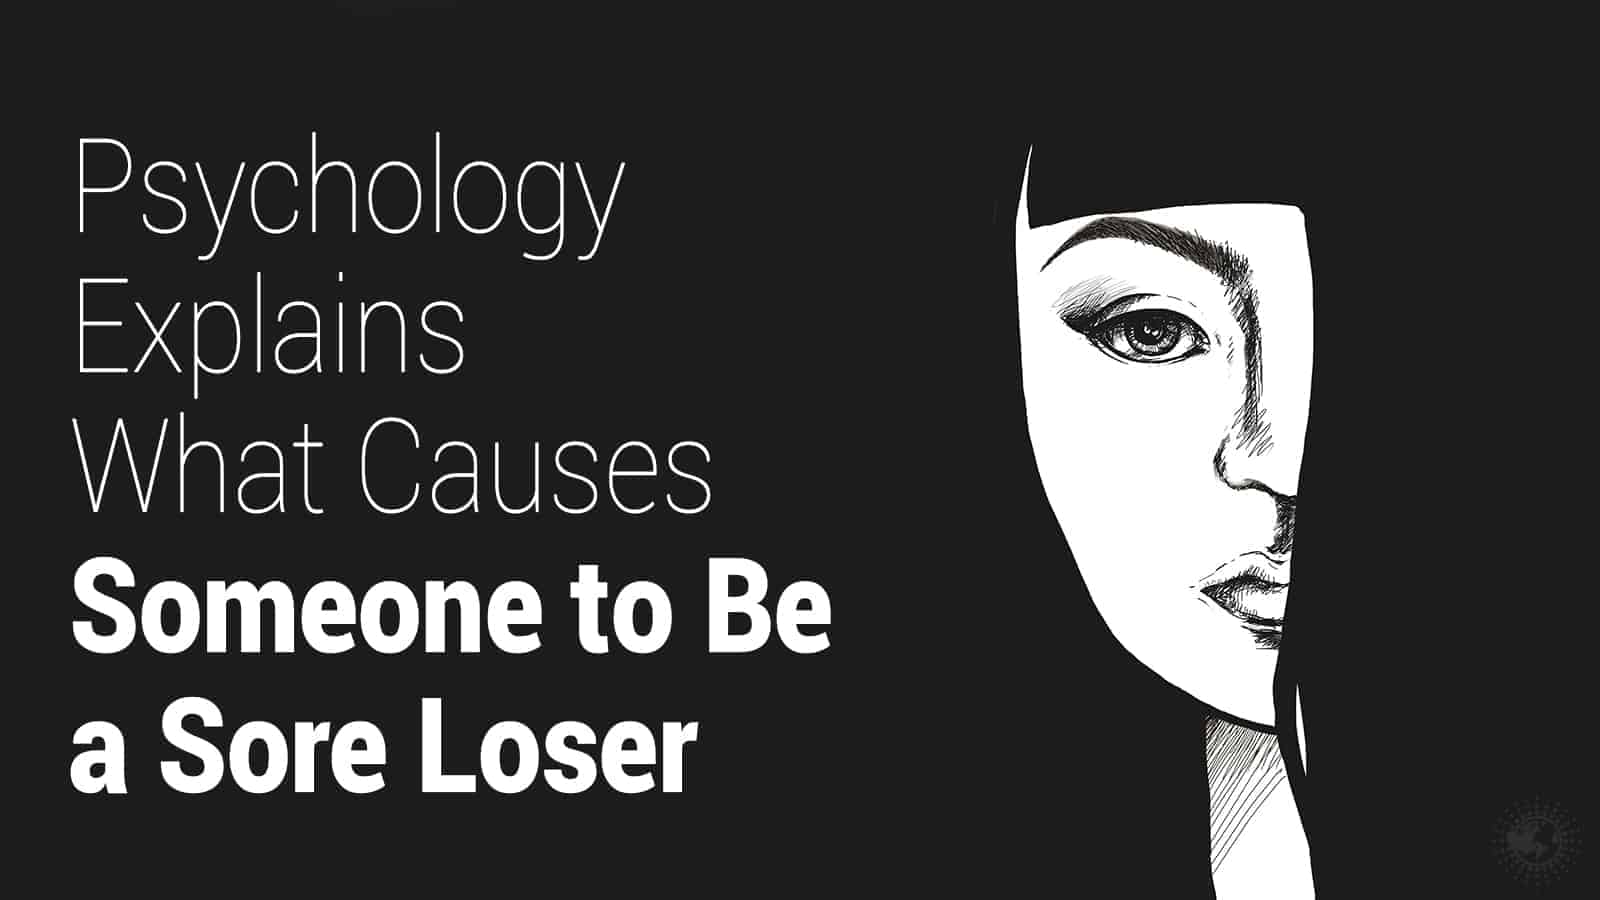 Psychology Explains What Causes Someone to Be a Sore Loser